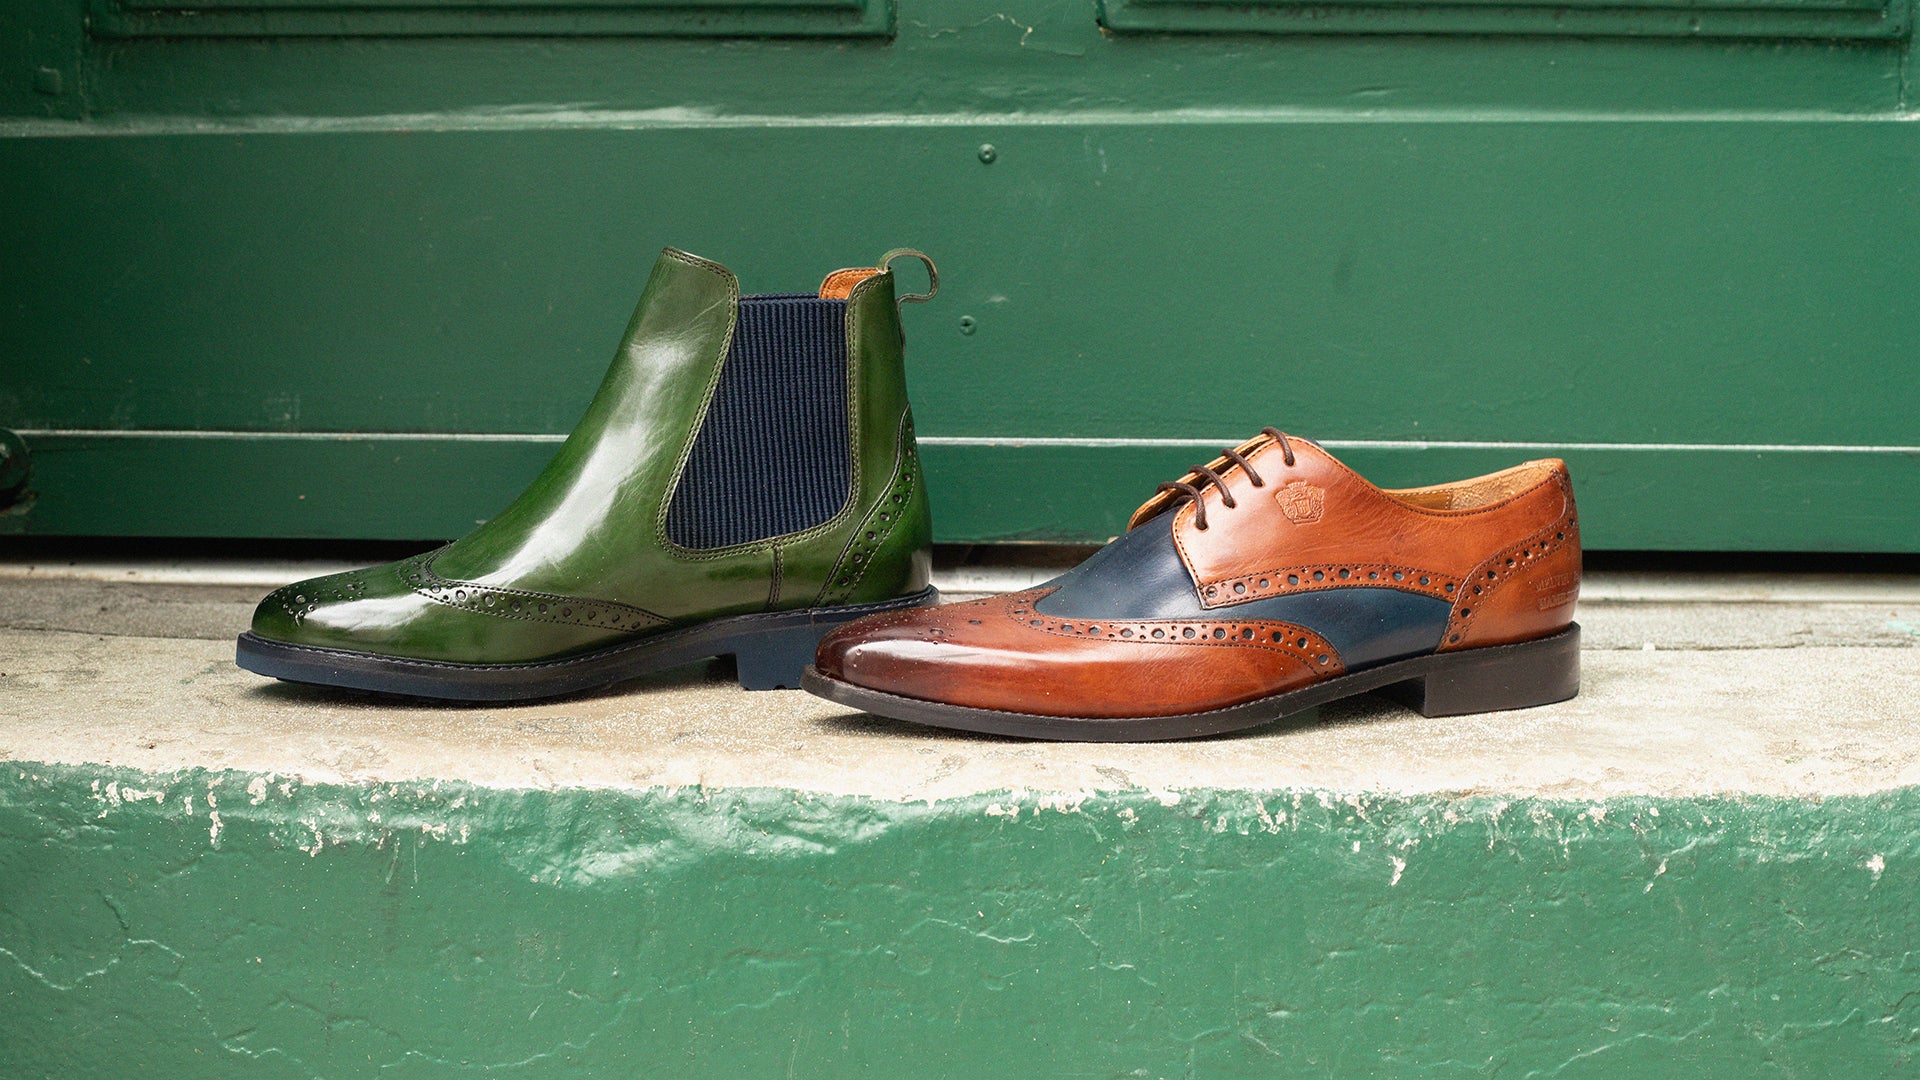 Men's fashion: what pair of shoes to wear to the office? – Melvin & Hamilton